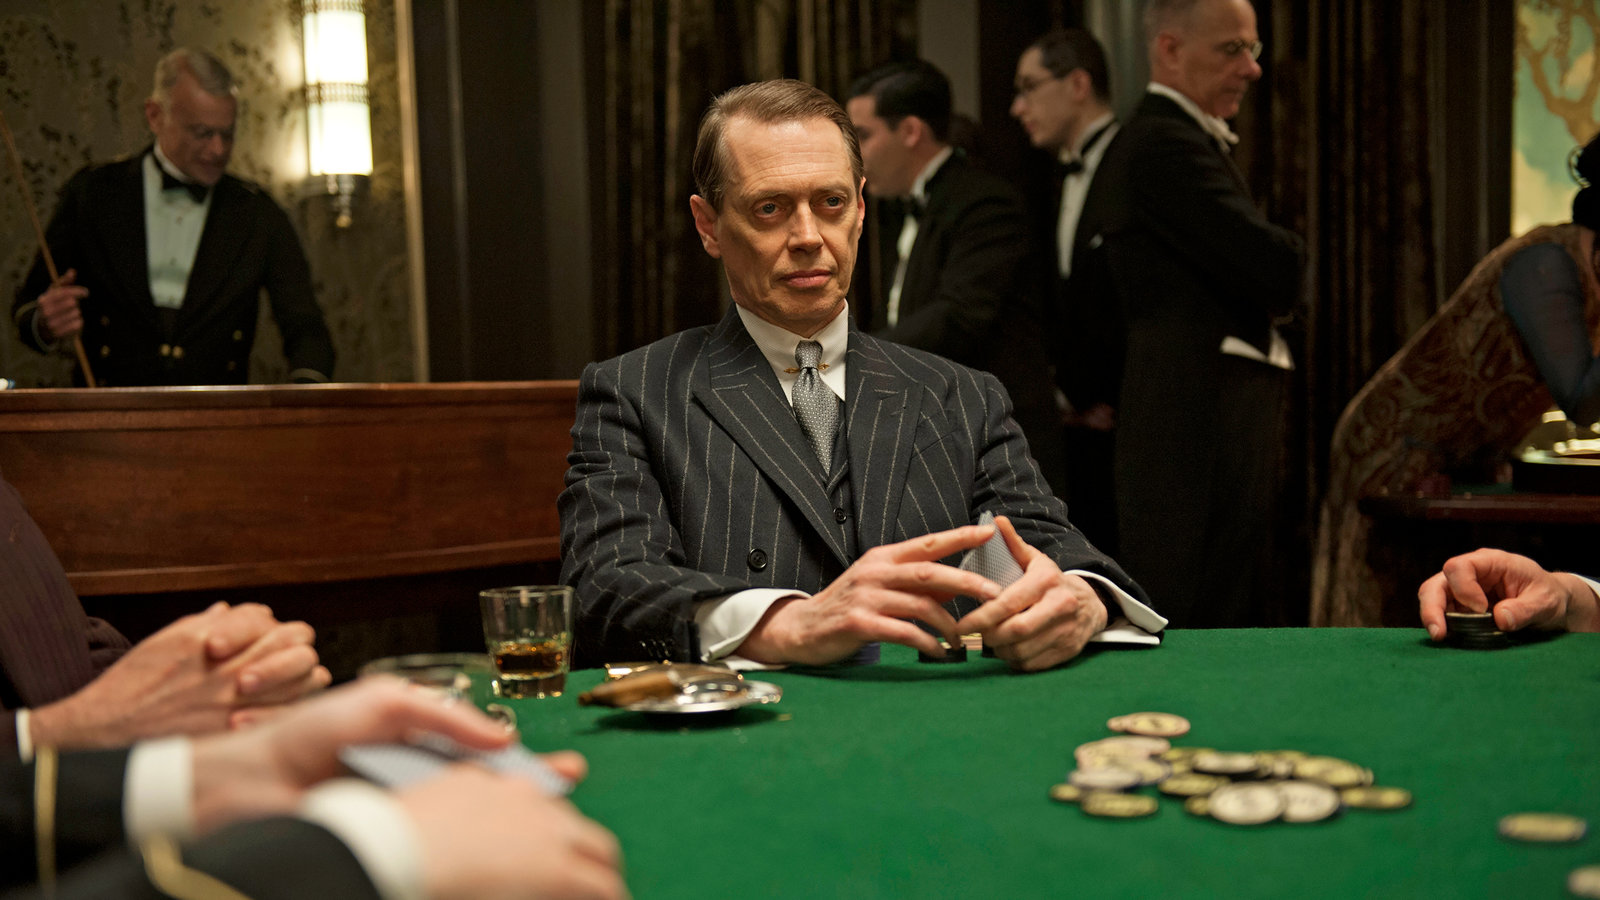 Boardwalk Empire (2010–2014) by Terence Winter